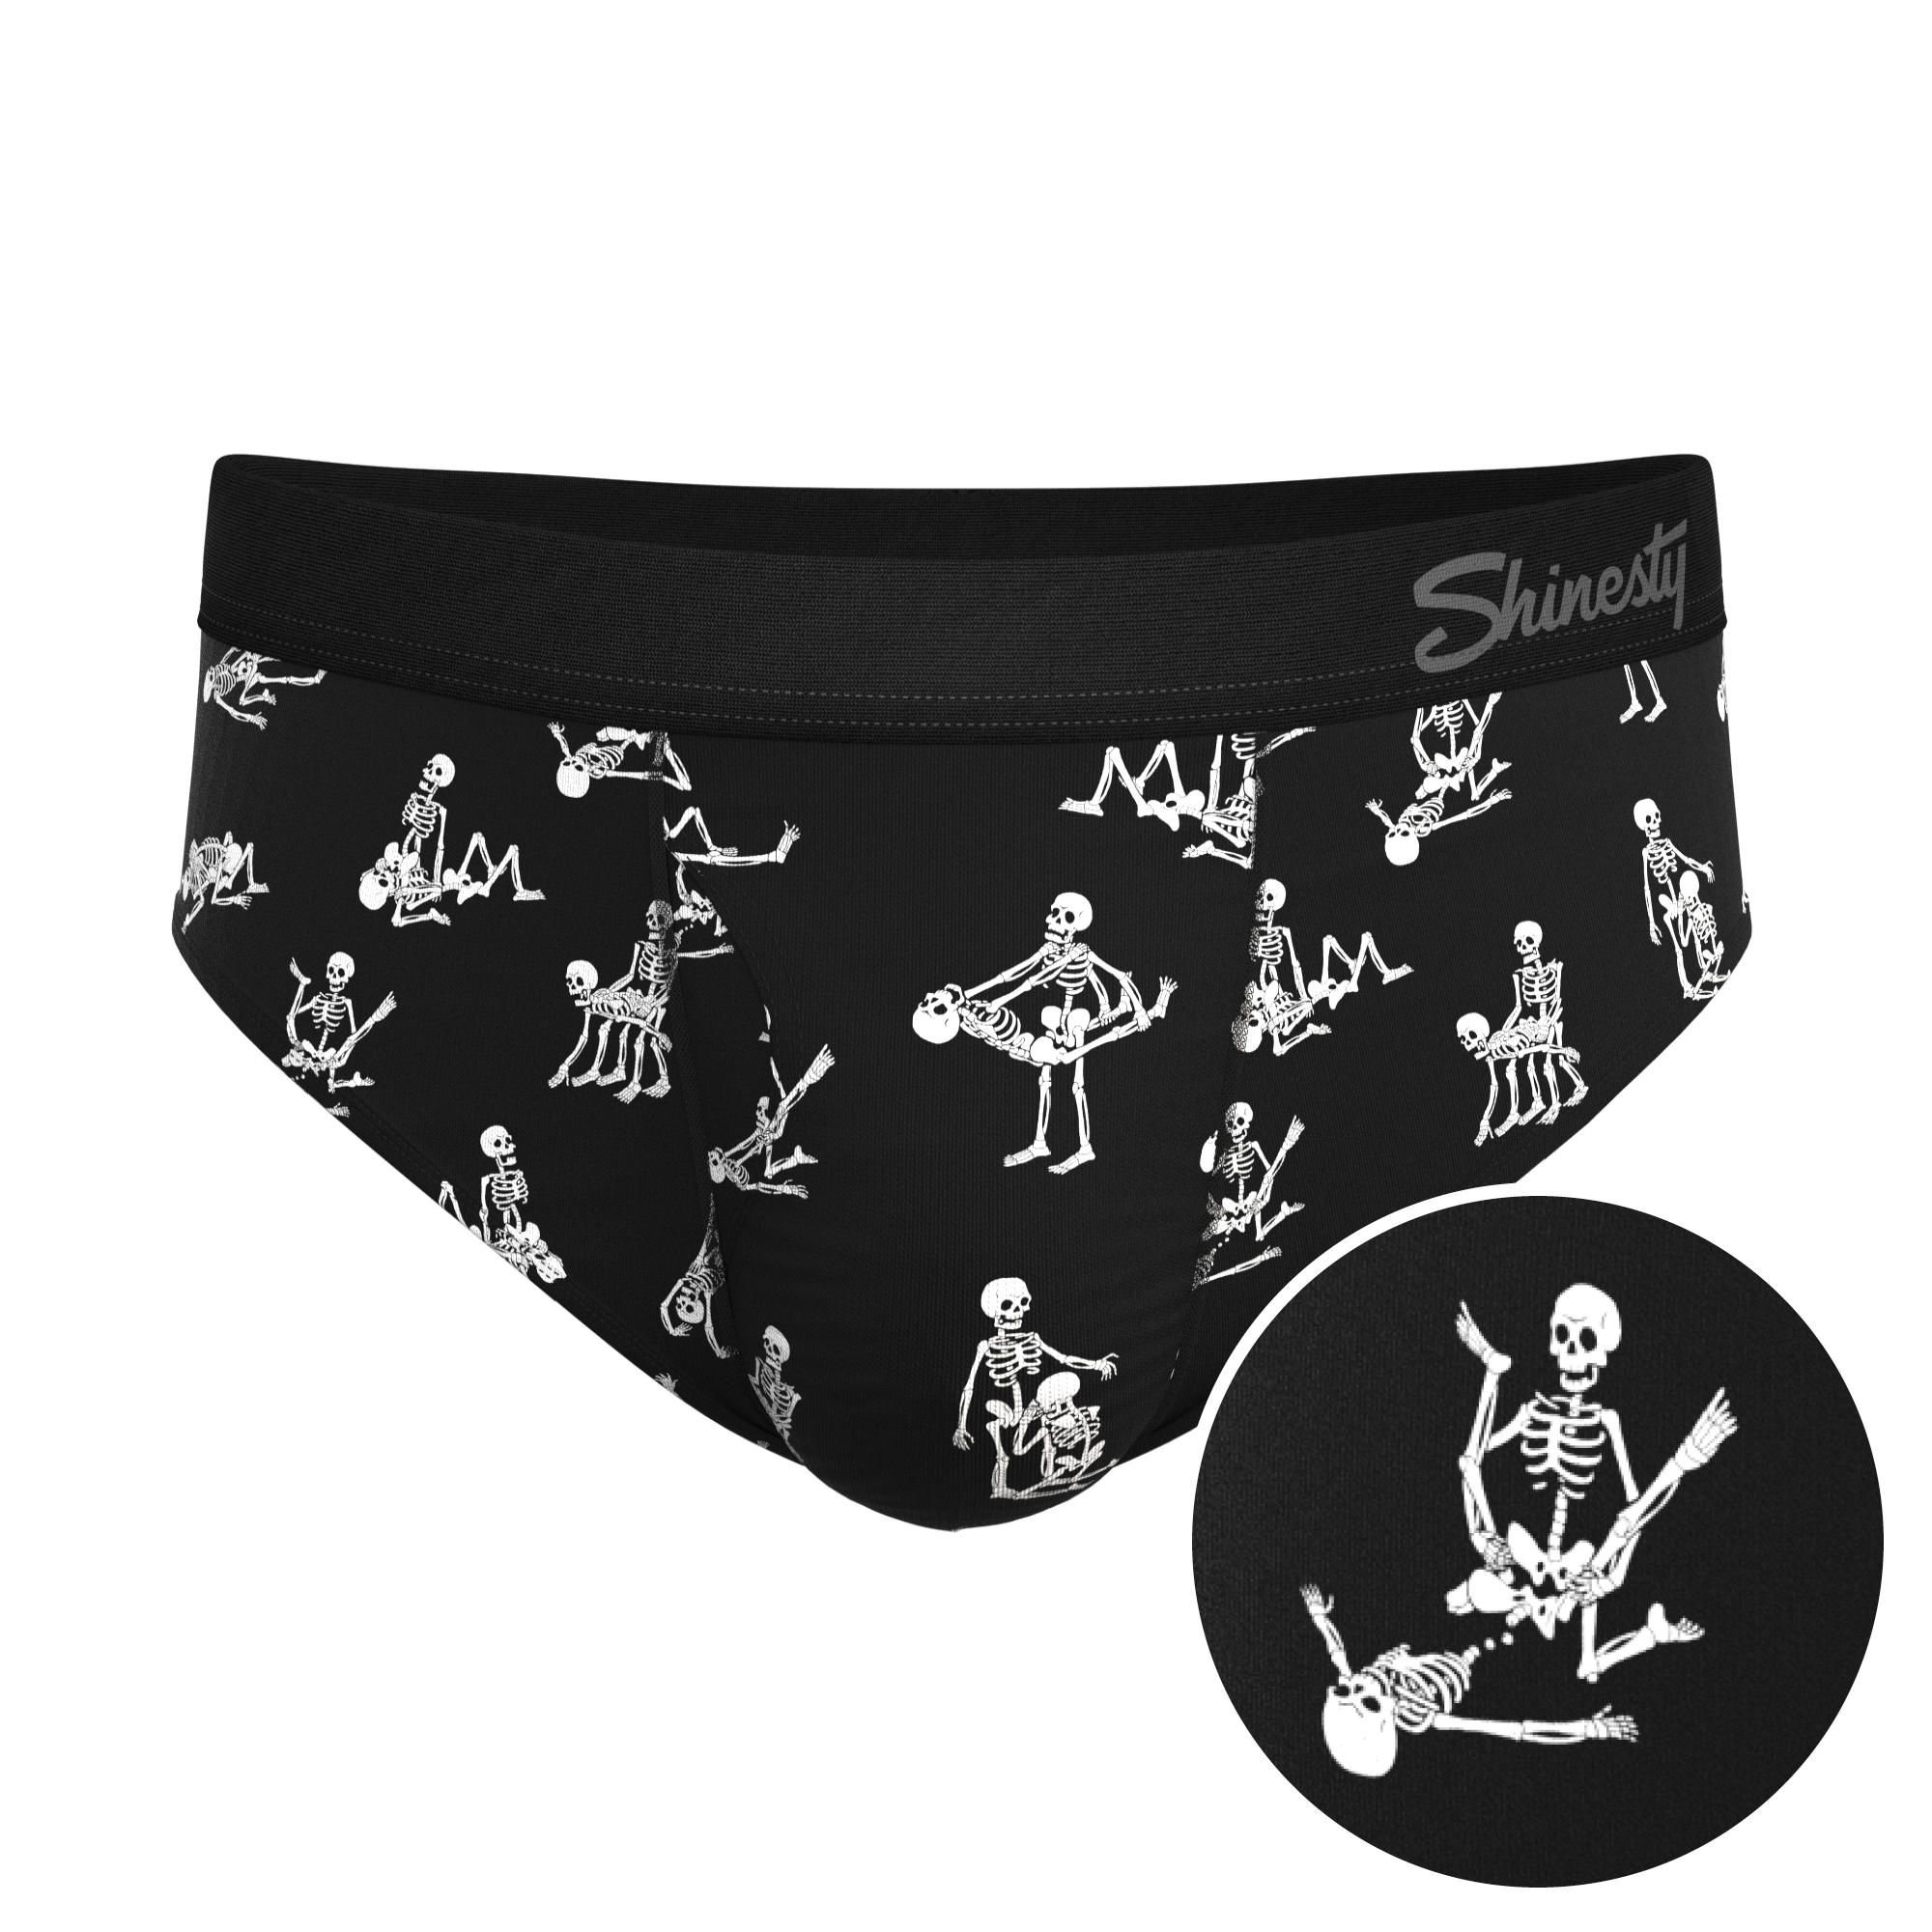 STAND OUT BE ODD BONES Black and White Boxer Briefs Underwear